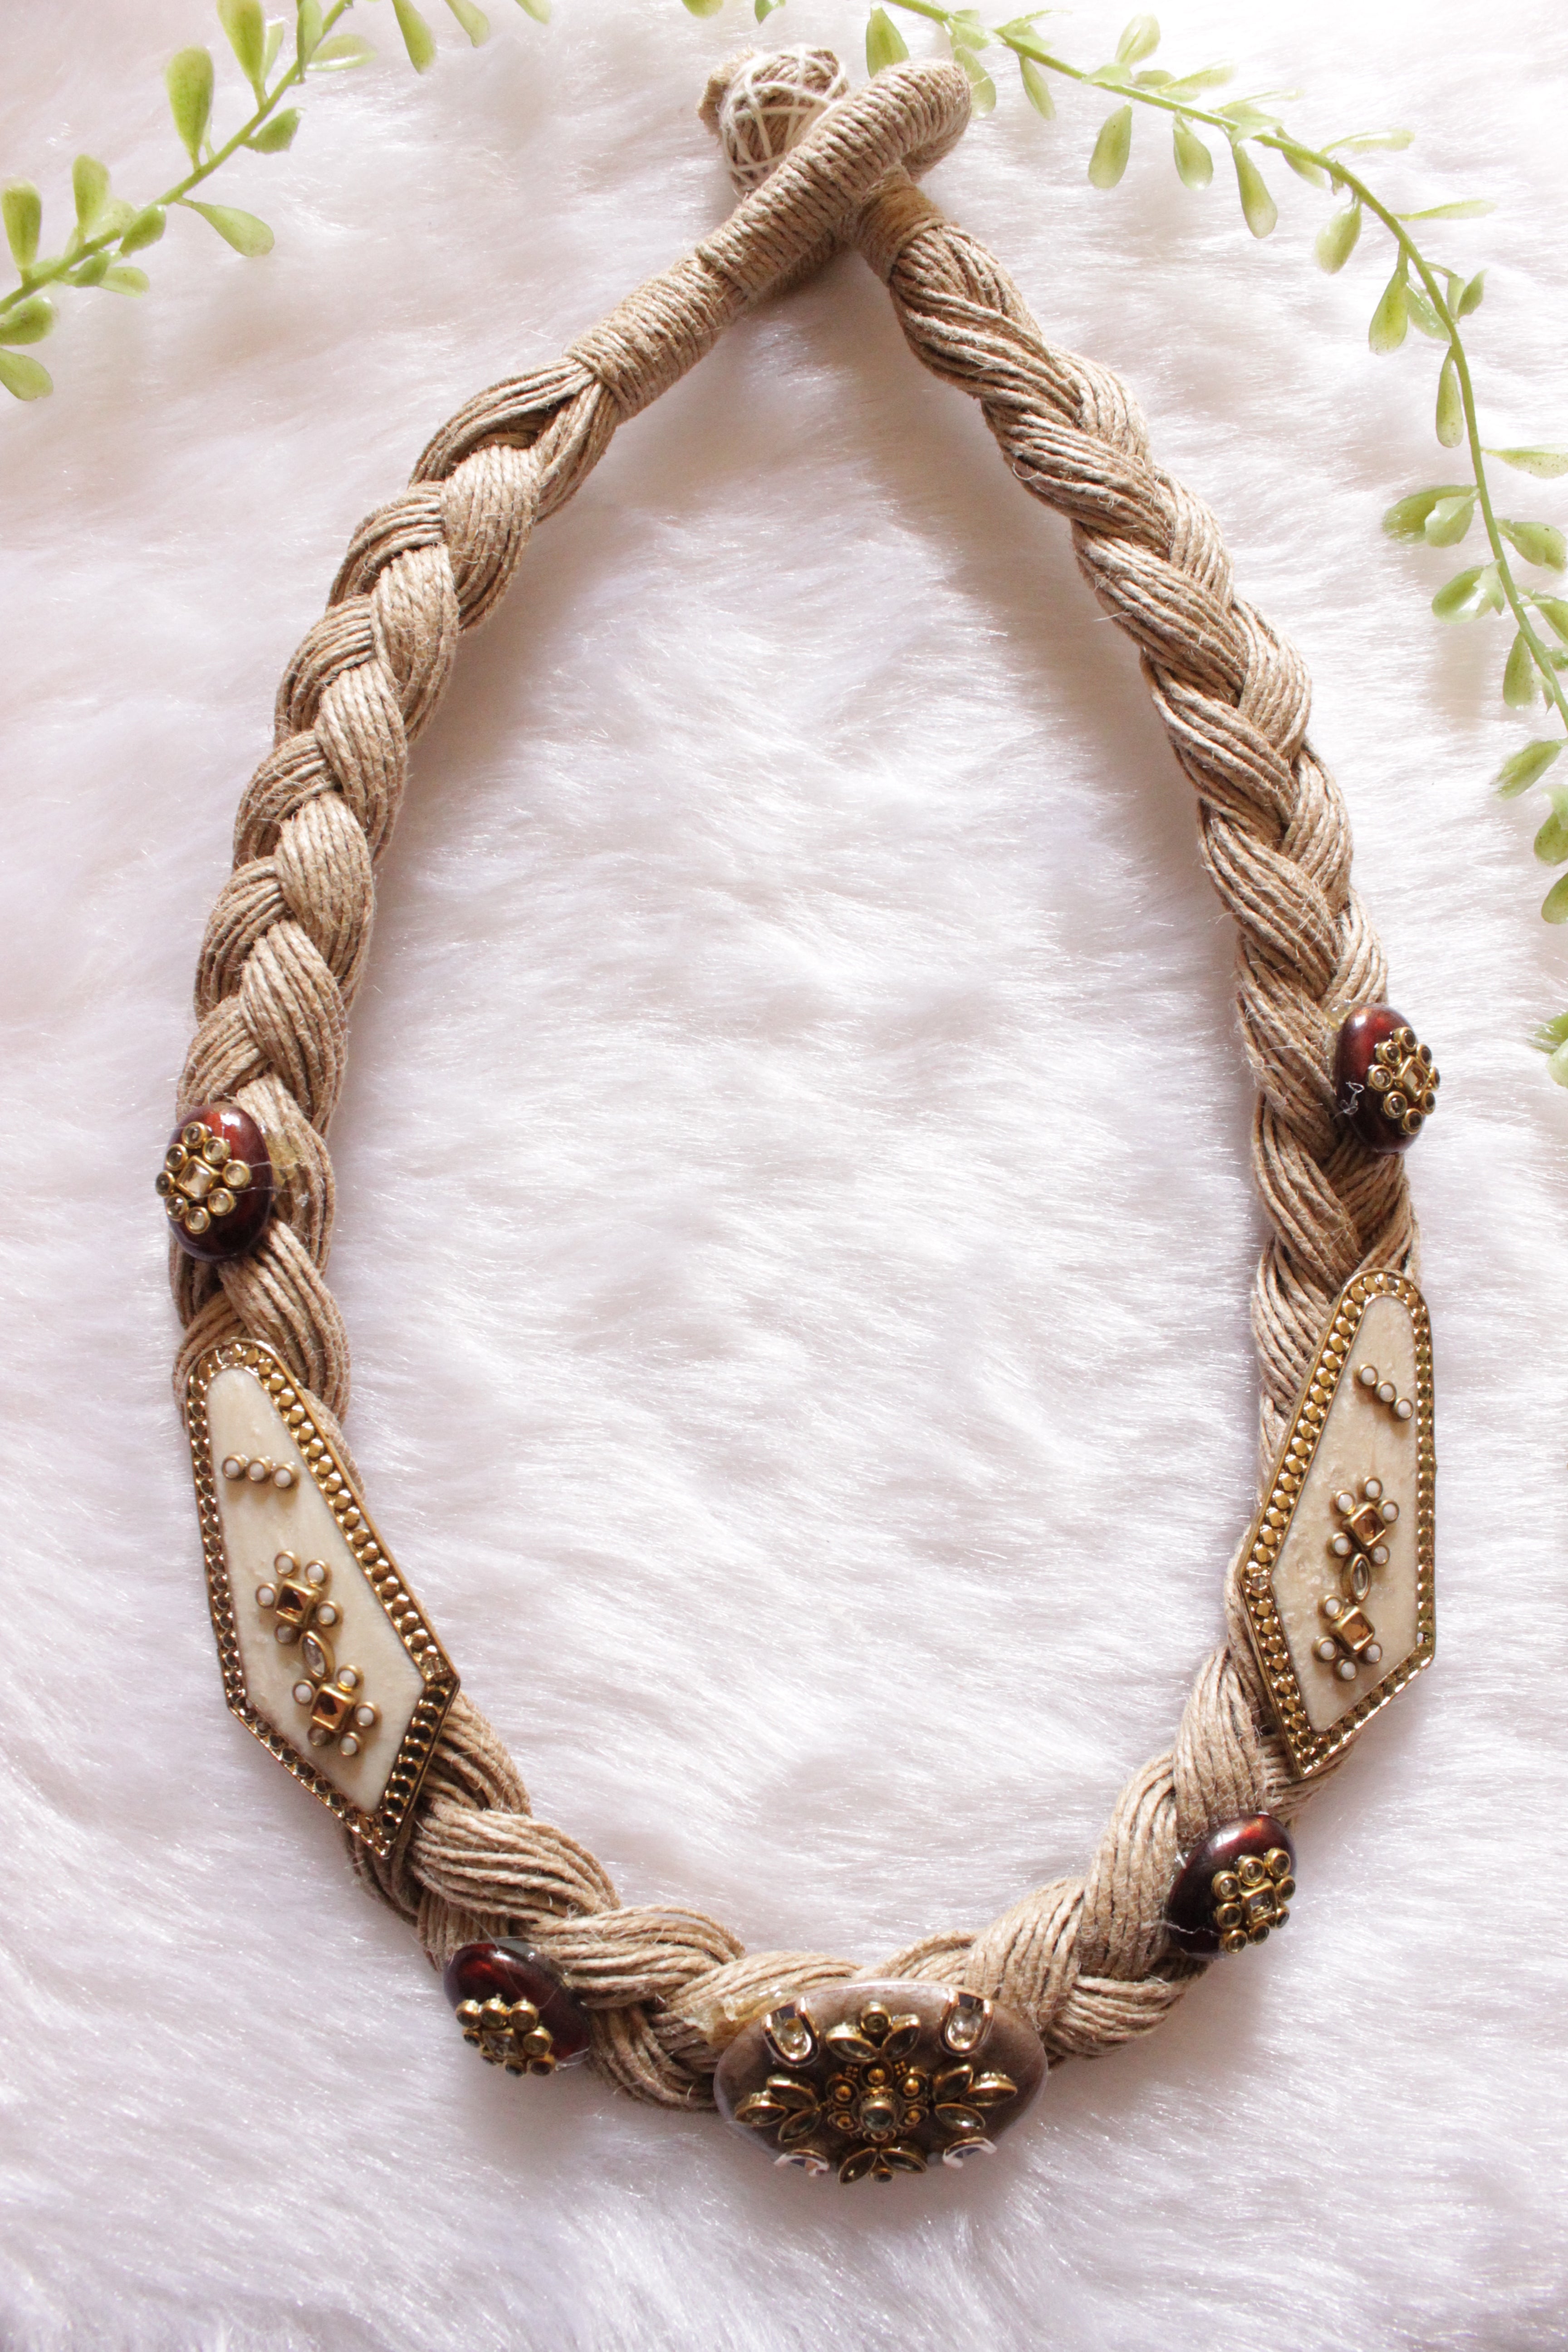 Multiple Jute Strings Hand Braided Necklace with Charms